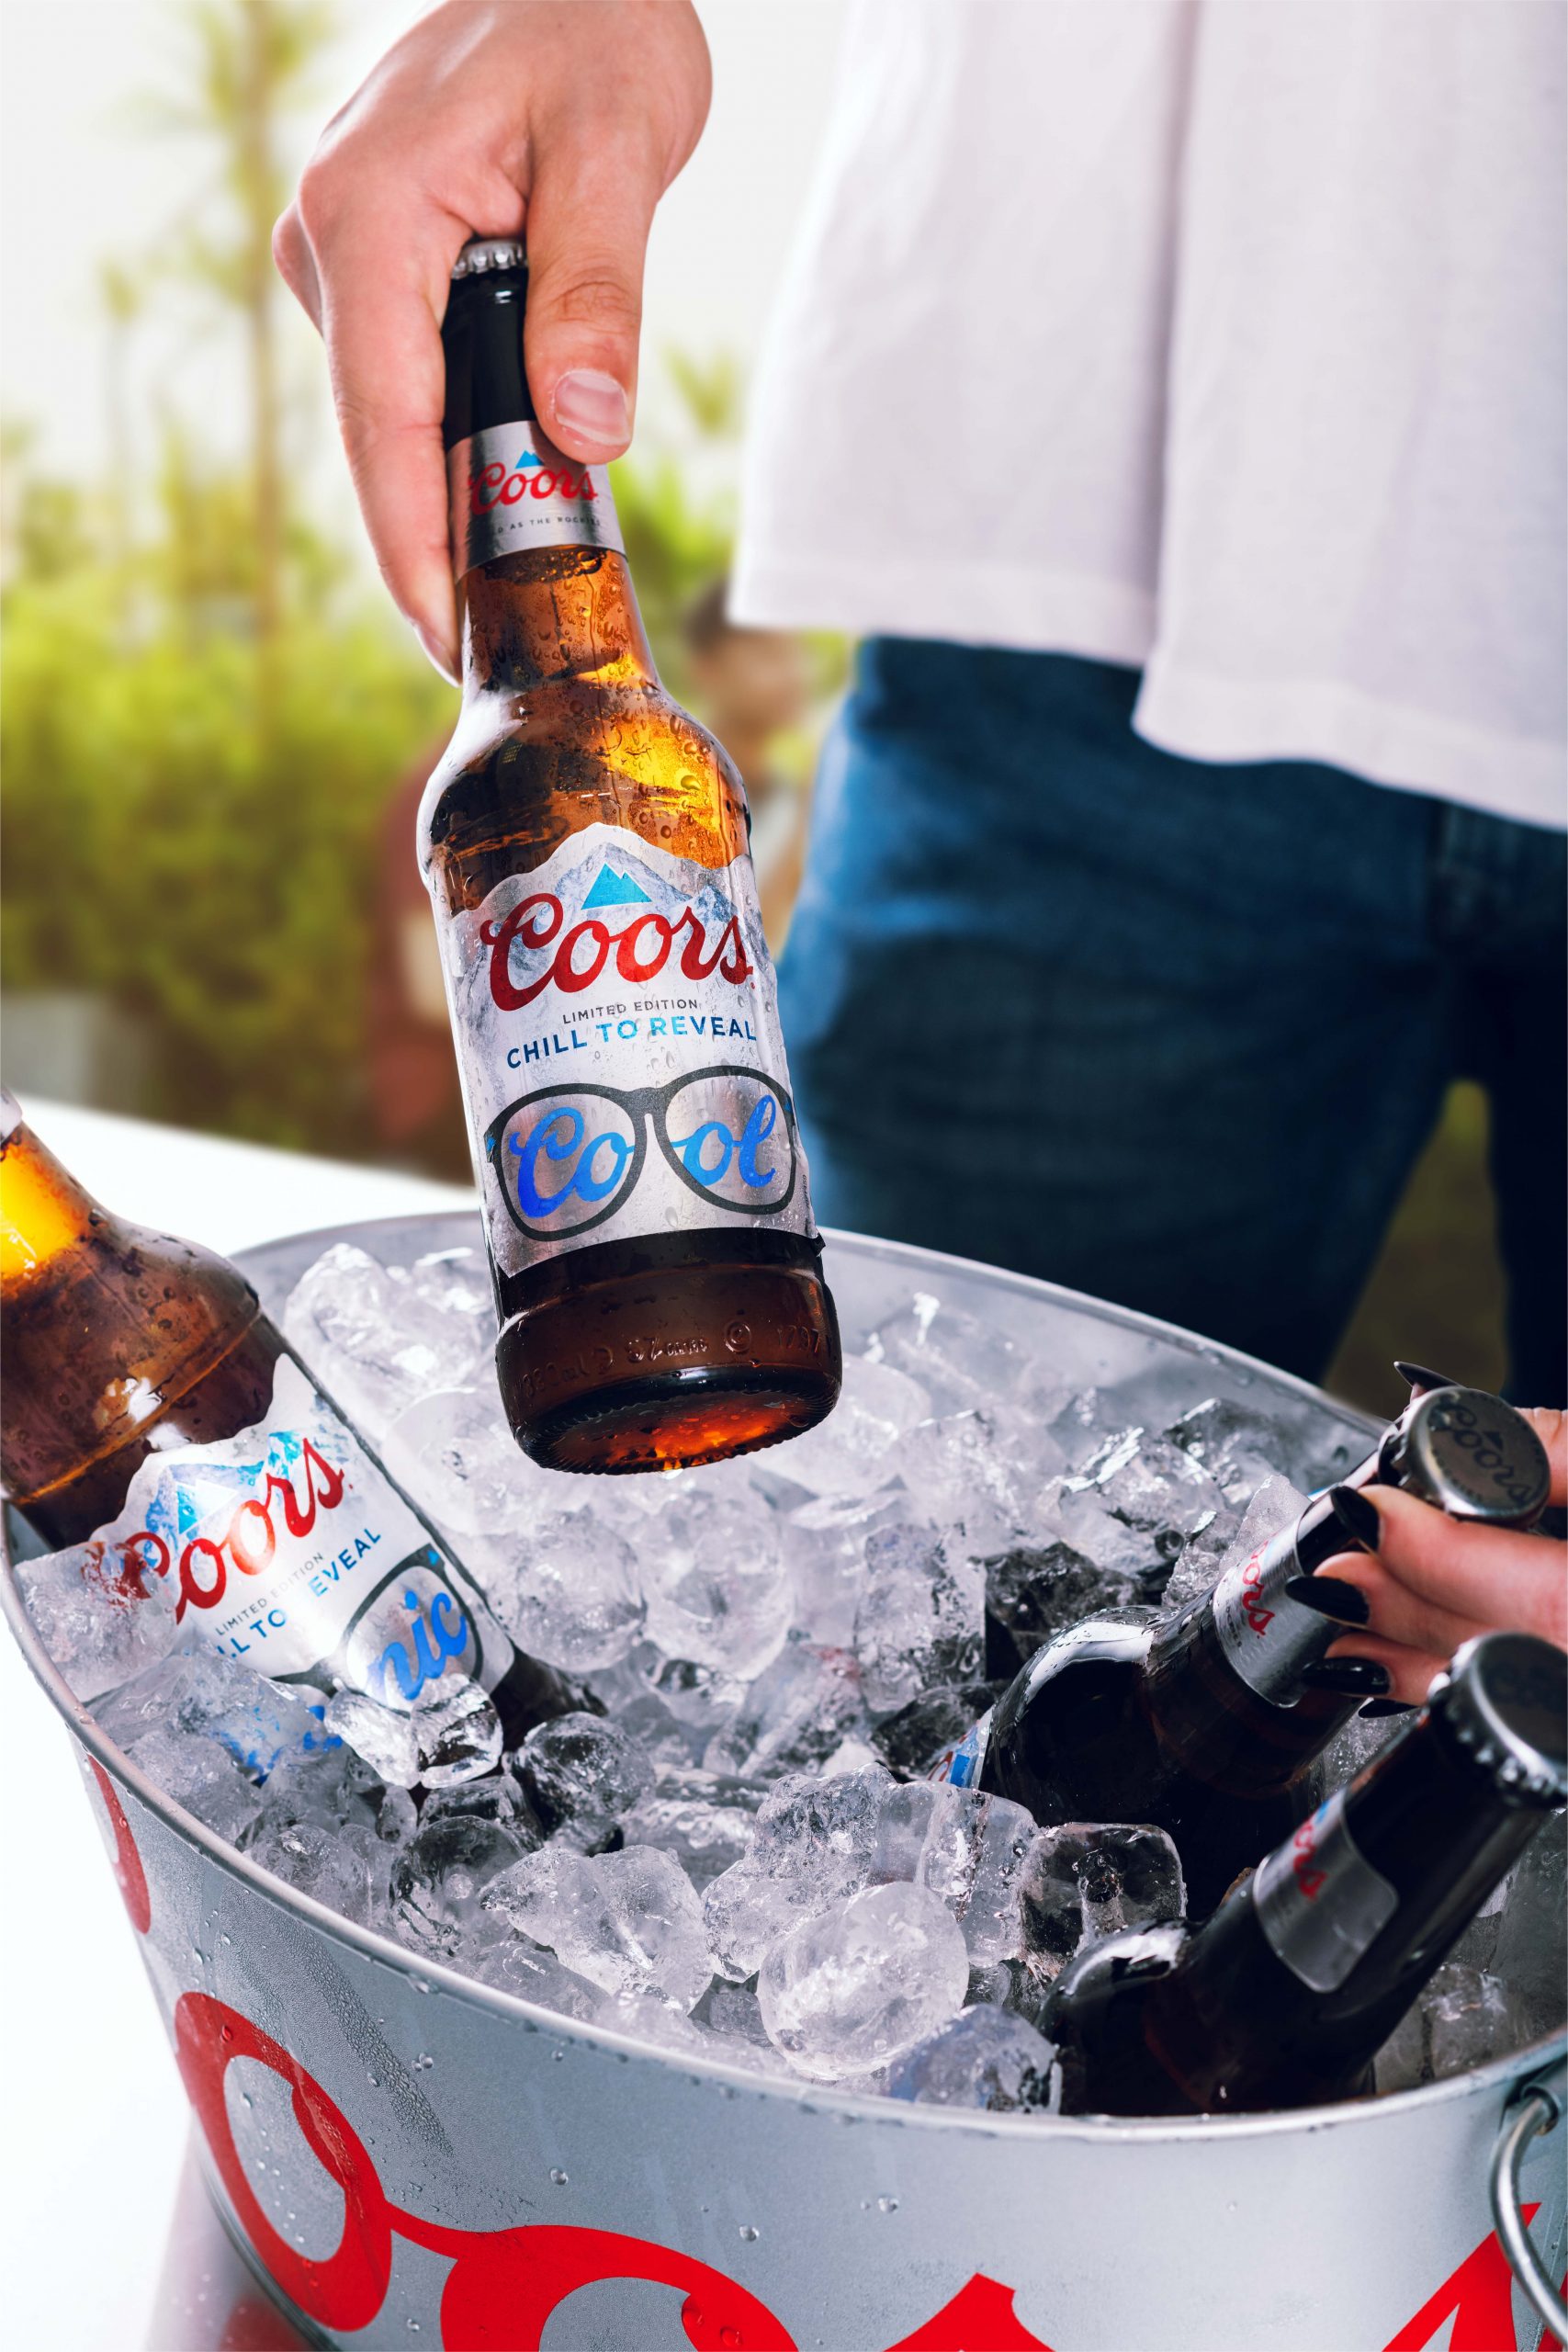 Coors keeps it cool this Summer with Limited Edition packs